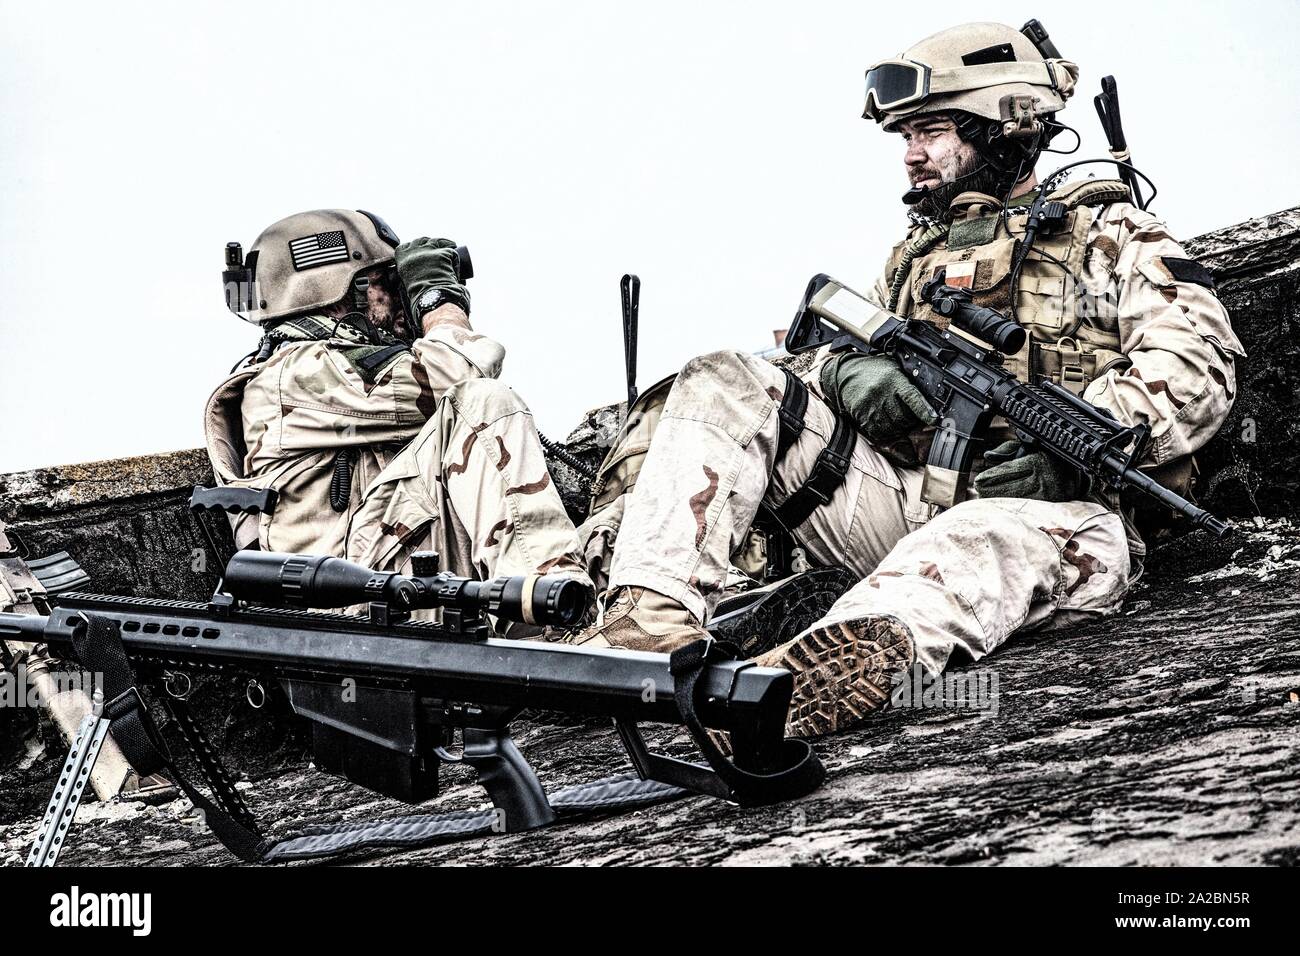 U. S. Navy SEAL infantrymen, commando marksman in battle uniform, armed with assault service rifle with optics sight, observing territory while Stock Photo